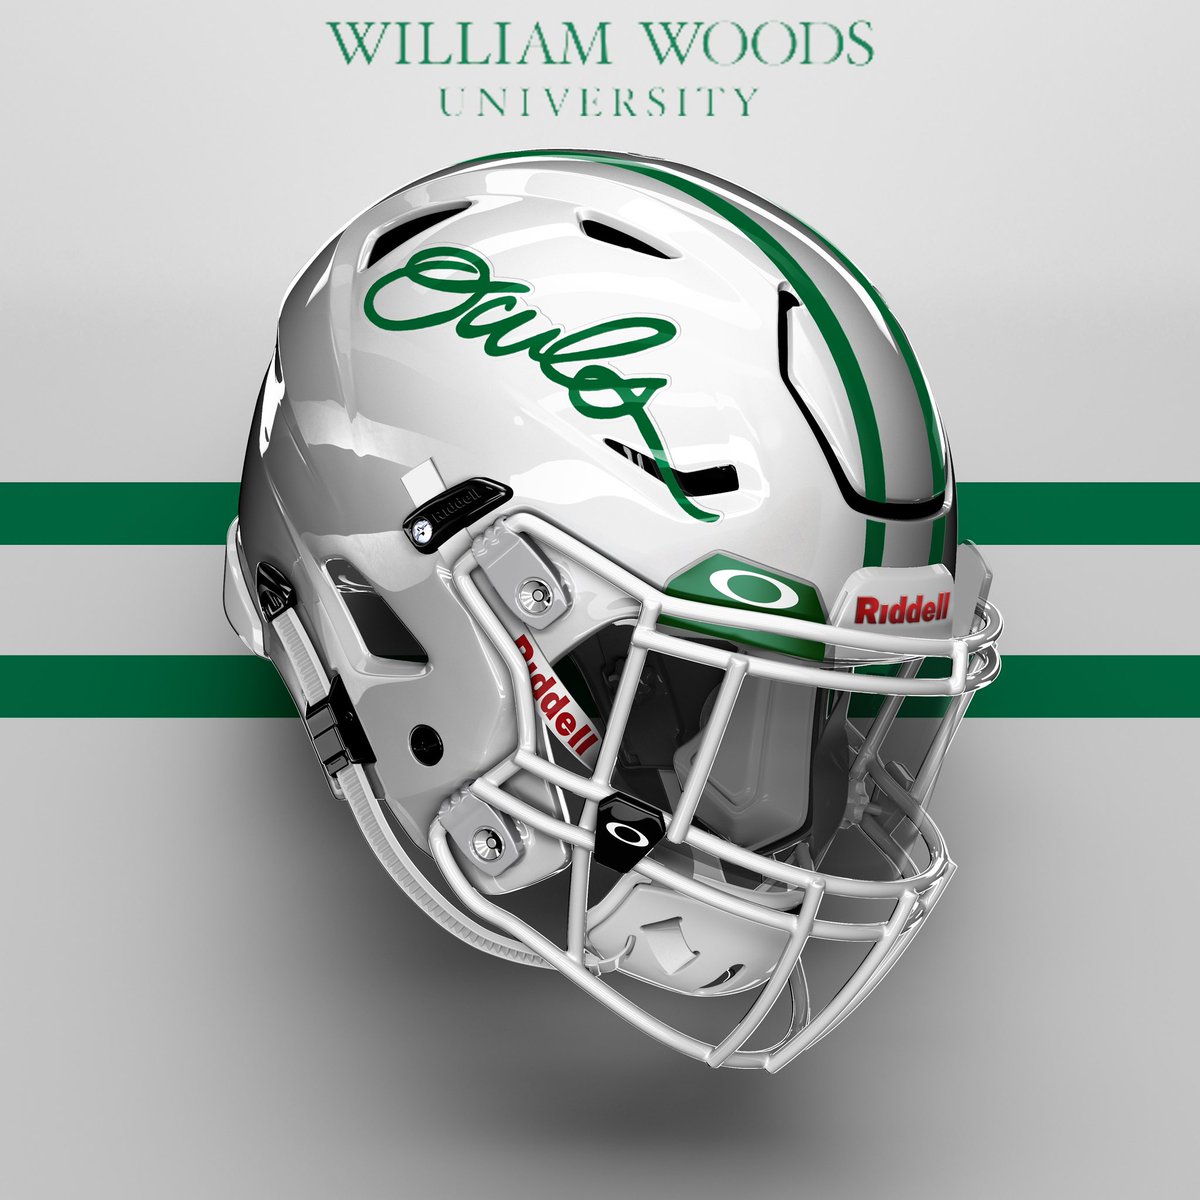 After a great conversation with @CoachCamp_ & @CoachJulianM I am Blessed to receive an Offer from Willam Woods University🙏🏾 @CoachCDeen